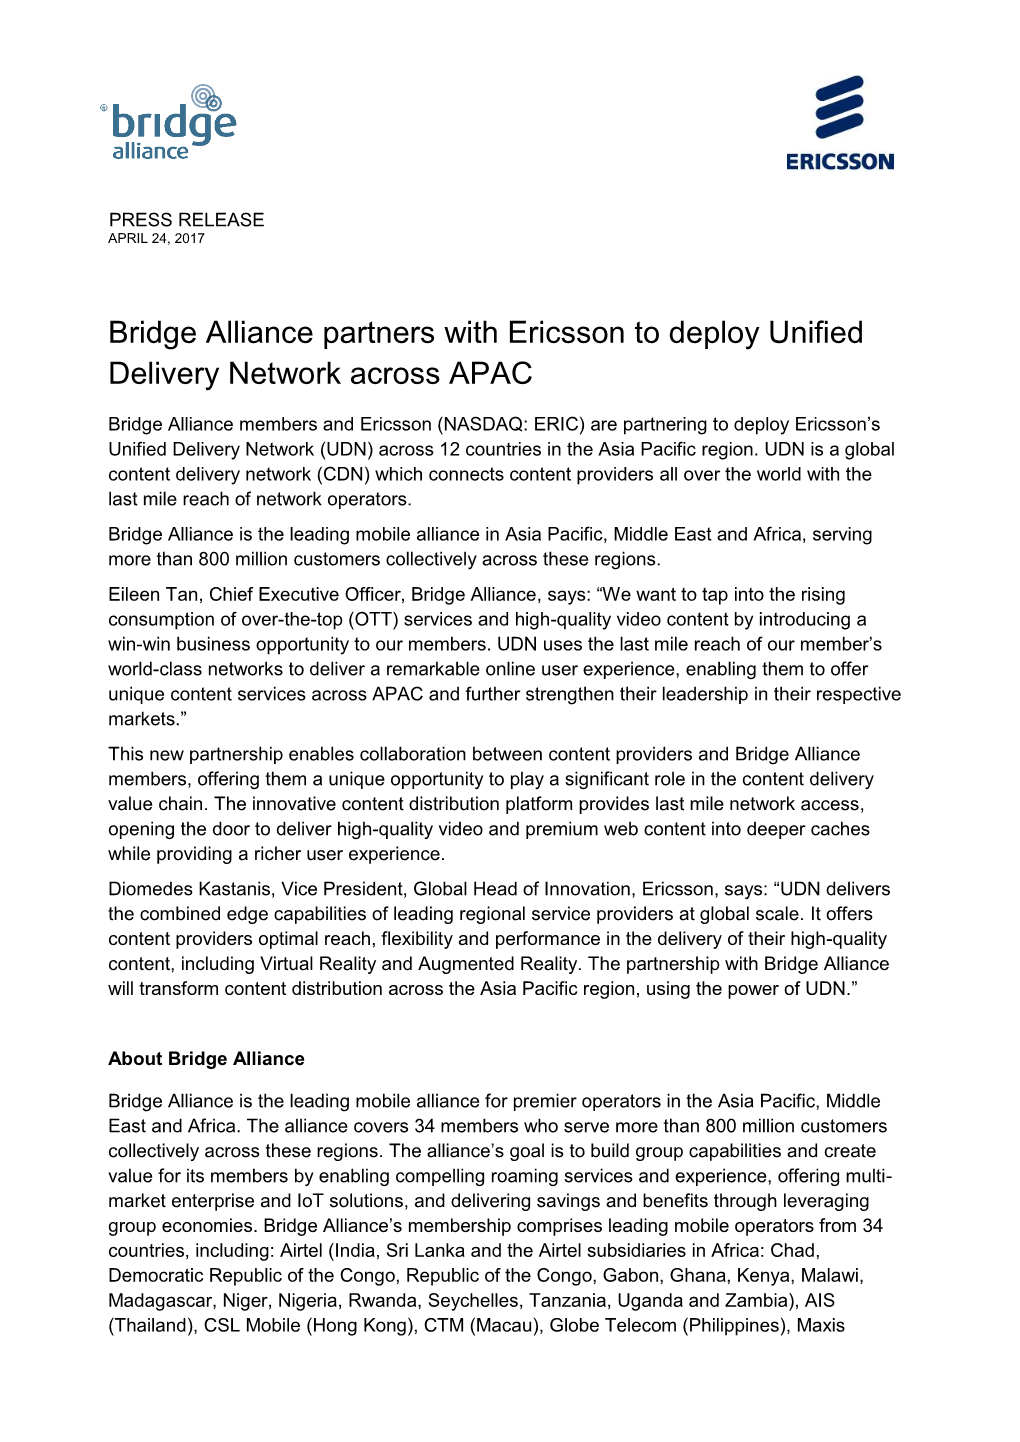 Bridge Alliance Partners with Ericsson to Deploy Unified Delivery Network Across APAC